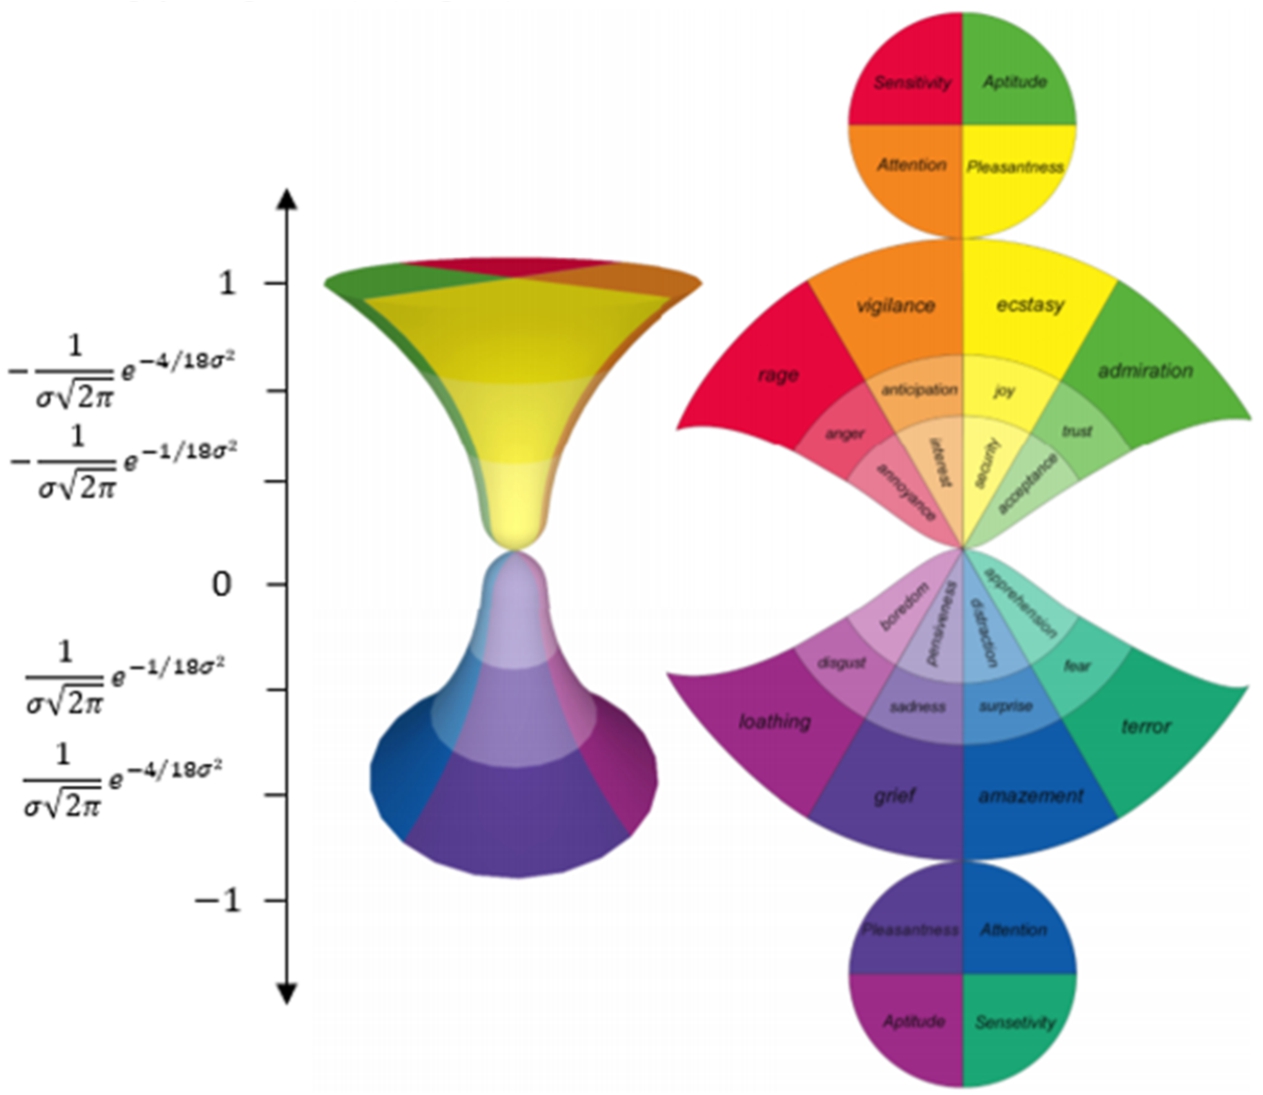 The 3D model and the net of the hourglass of emotions (Cambria et al., 2012).